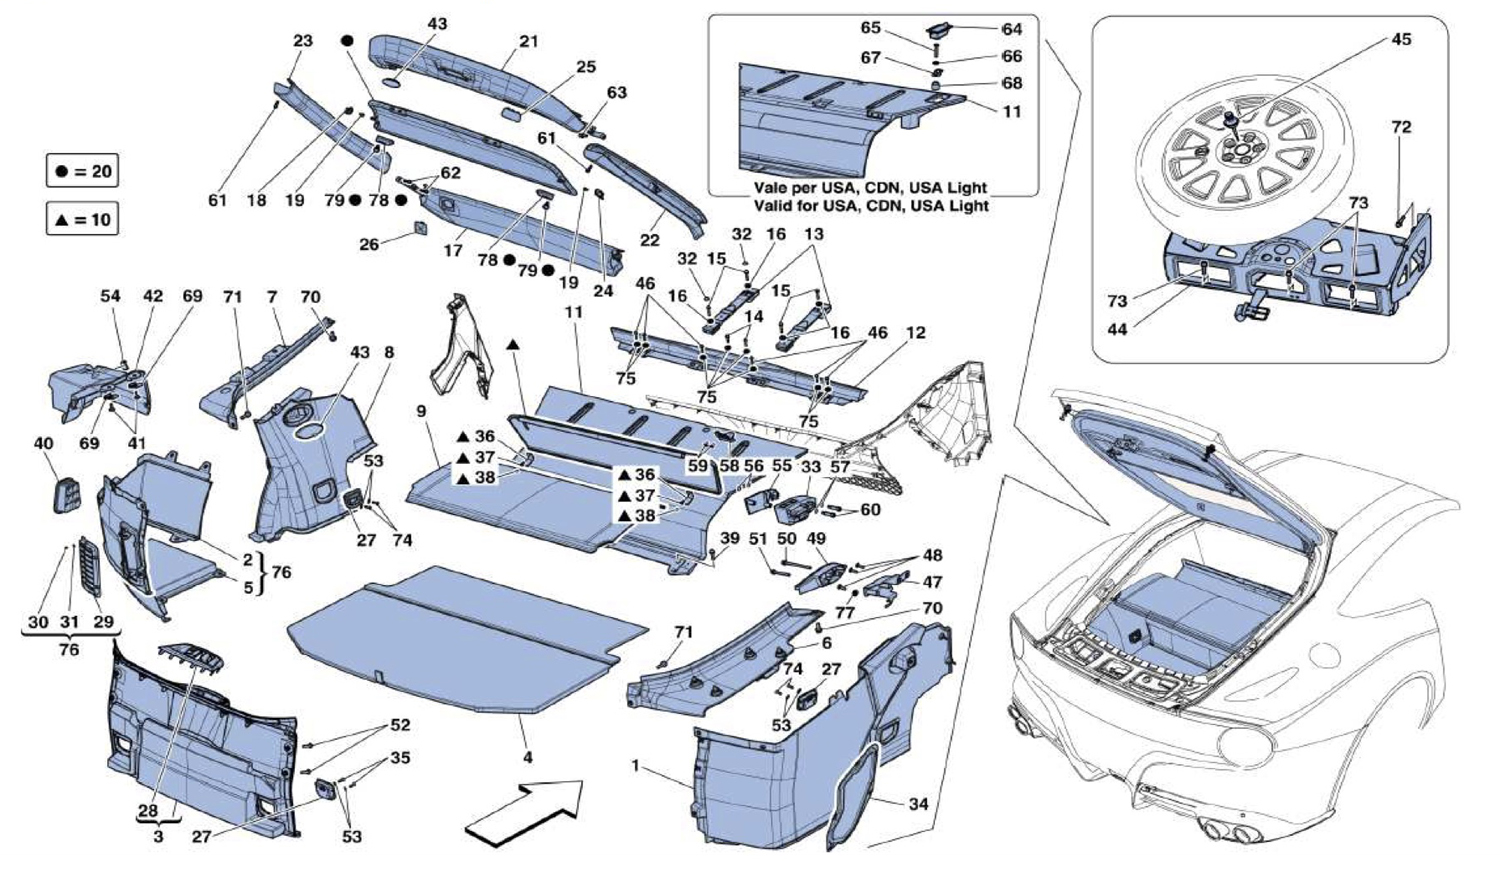 Schematic: Luggage Compartment Mats